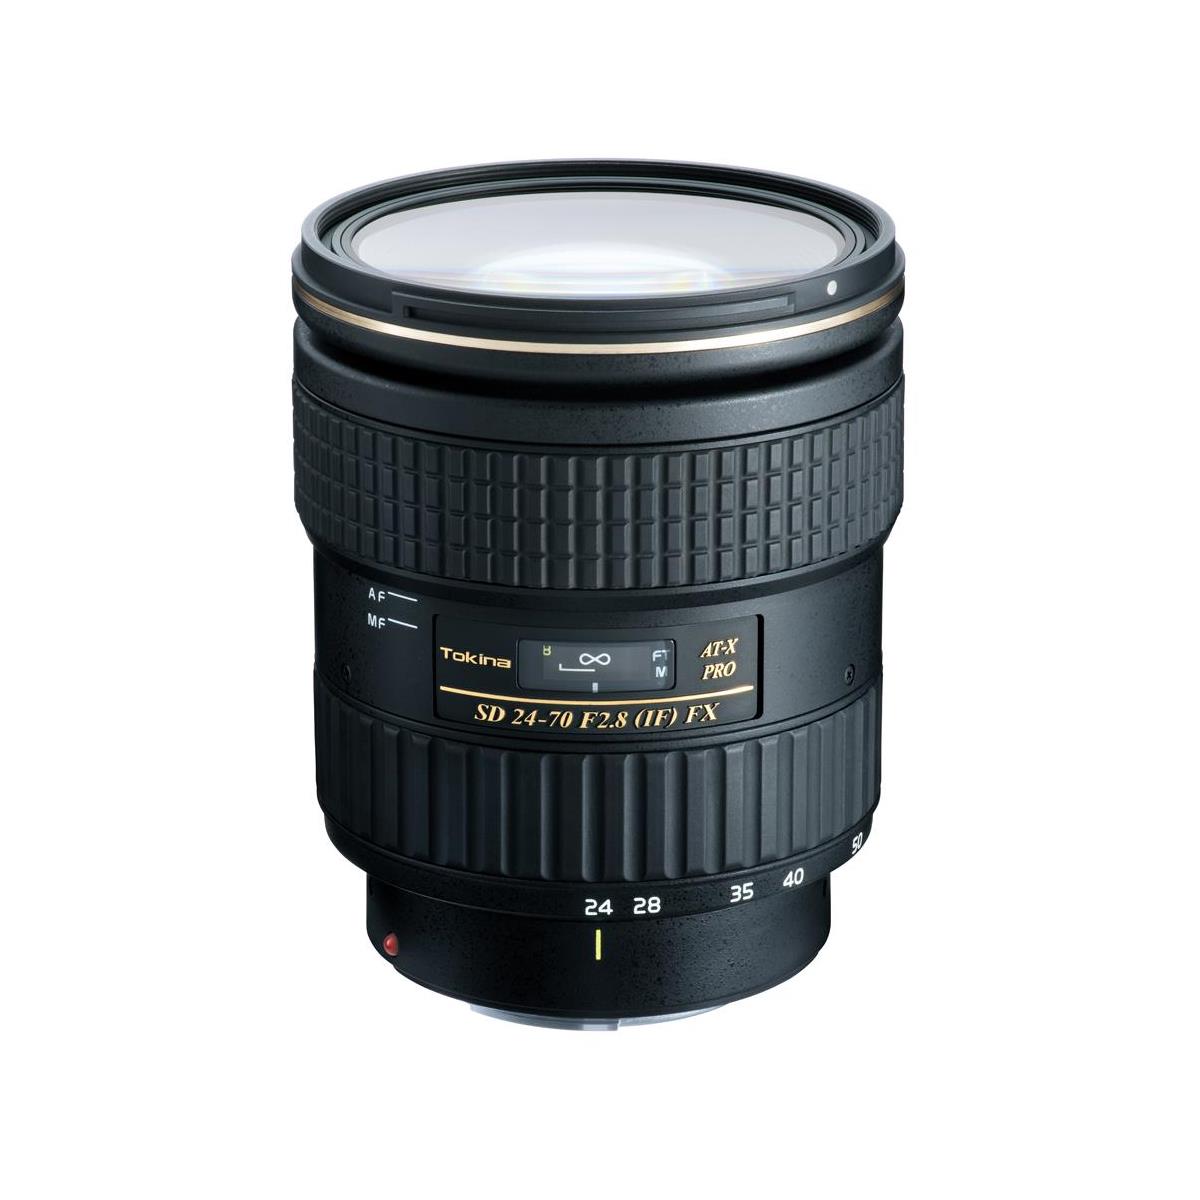 Tokina 24-70mm f/2.8 AT-X PRO FX Lens for Canon EF